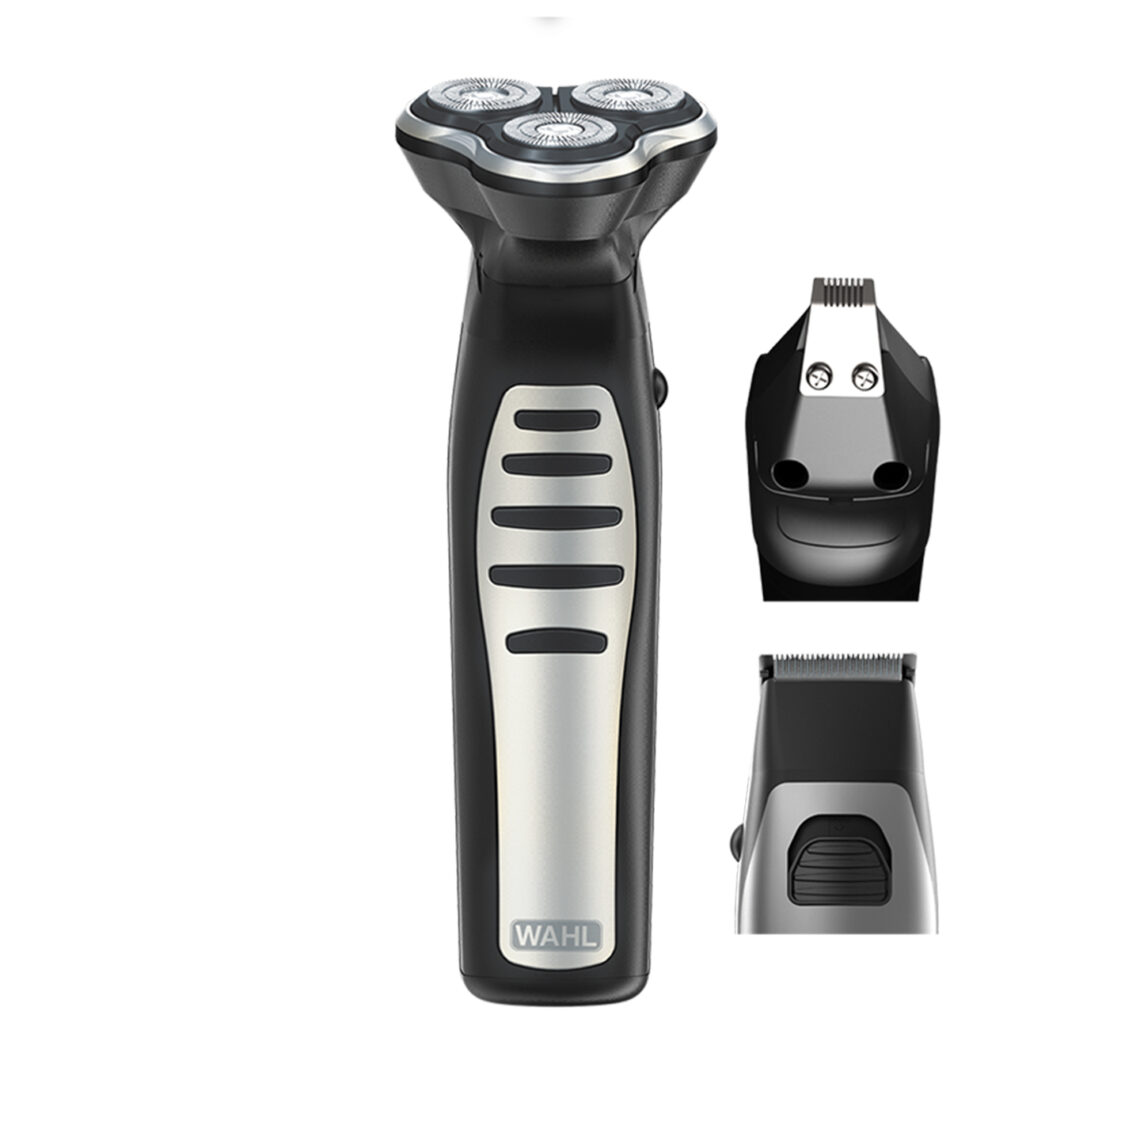 Triple Play Rechargeable Shaver, Trimmer & Detailer